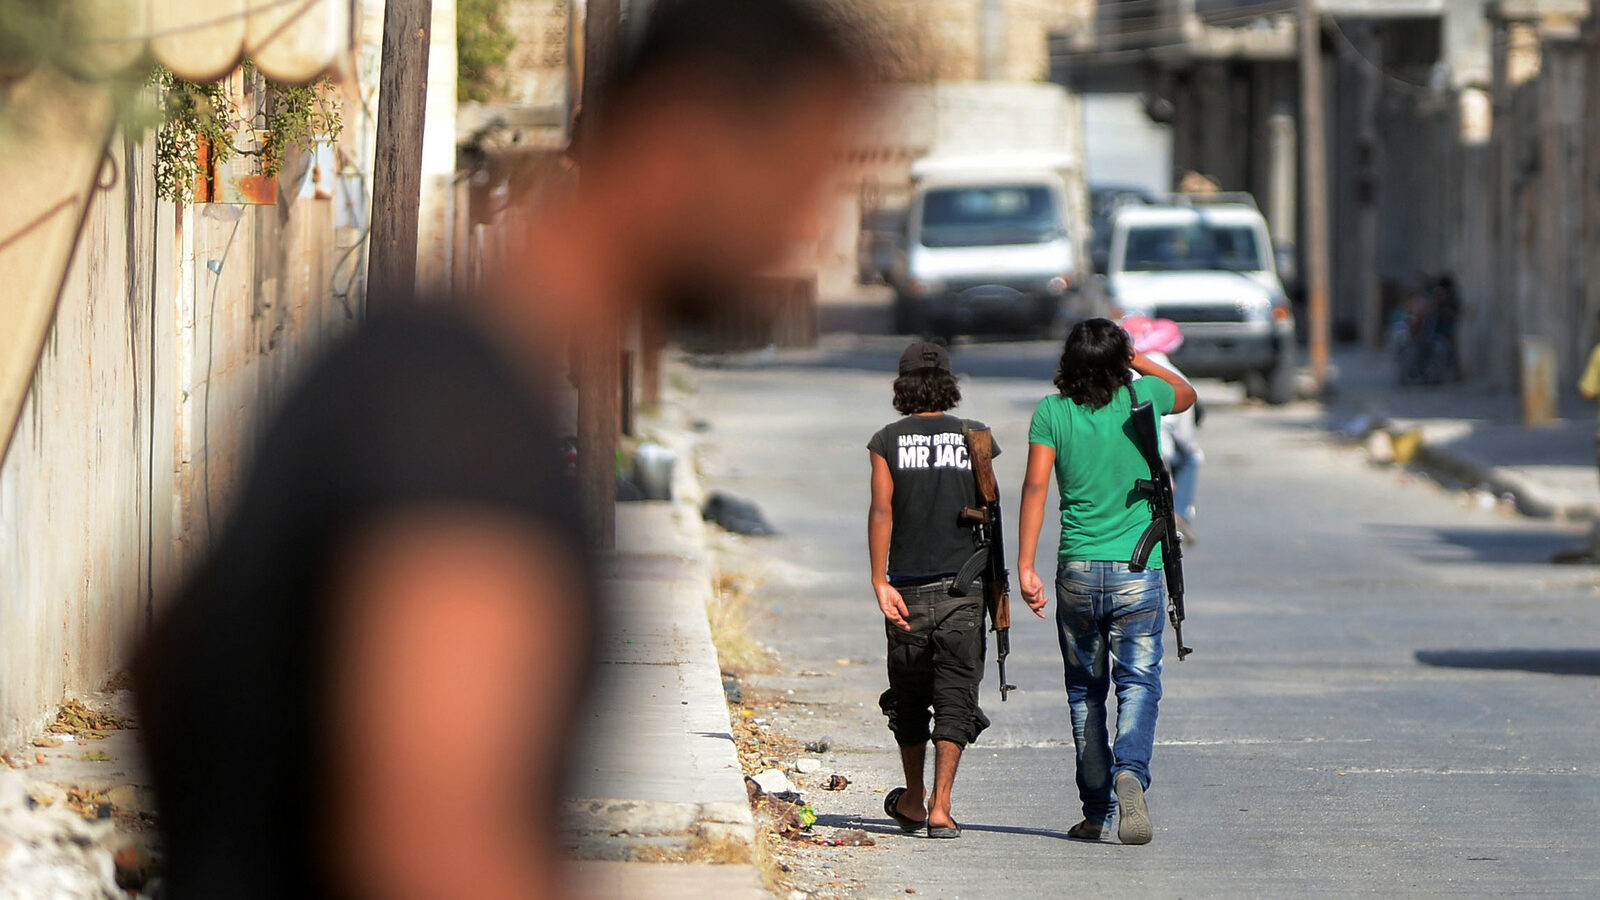 An unidentified man walks past young Free Syrian Army fighters patrolling the streets of Jarablus, Syria, Aug. 31, 2016. (Ismail Coskun/IHA/AP)